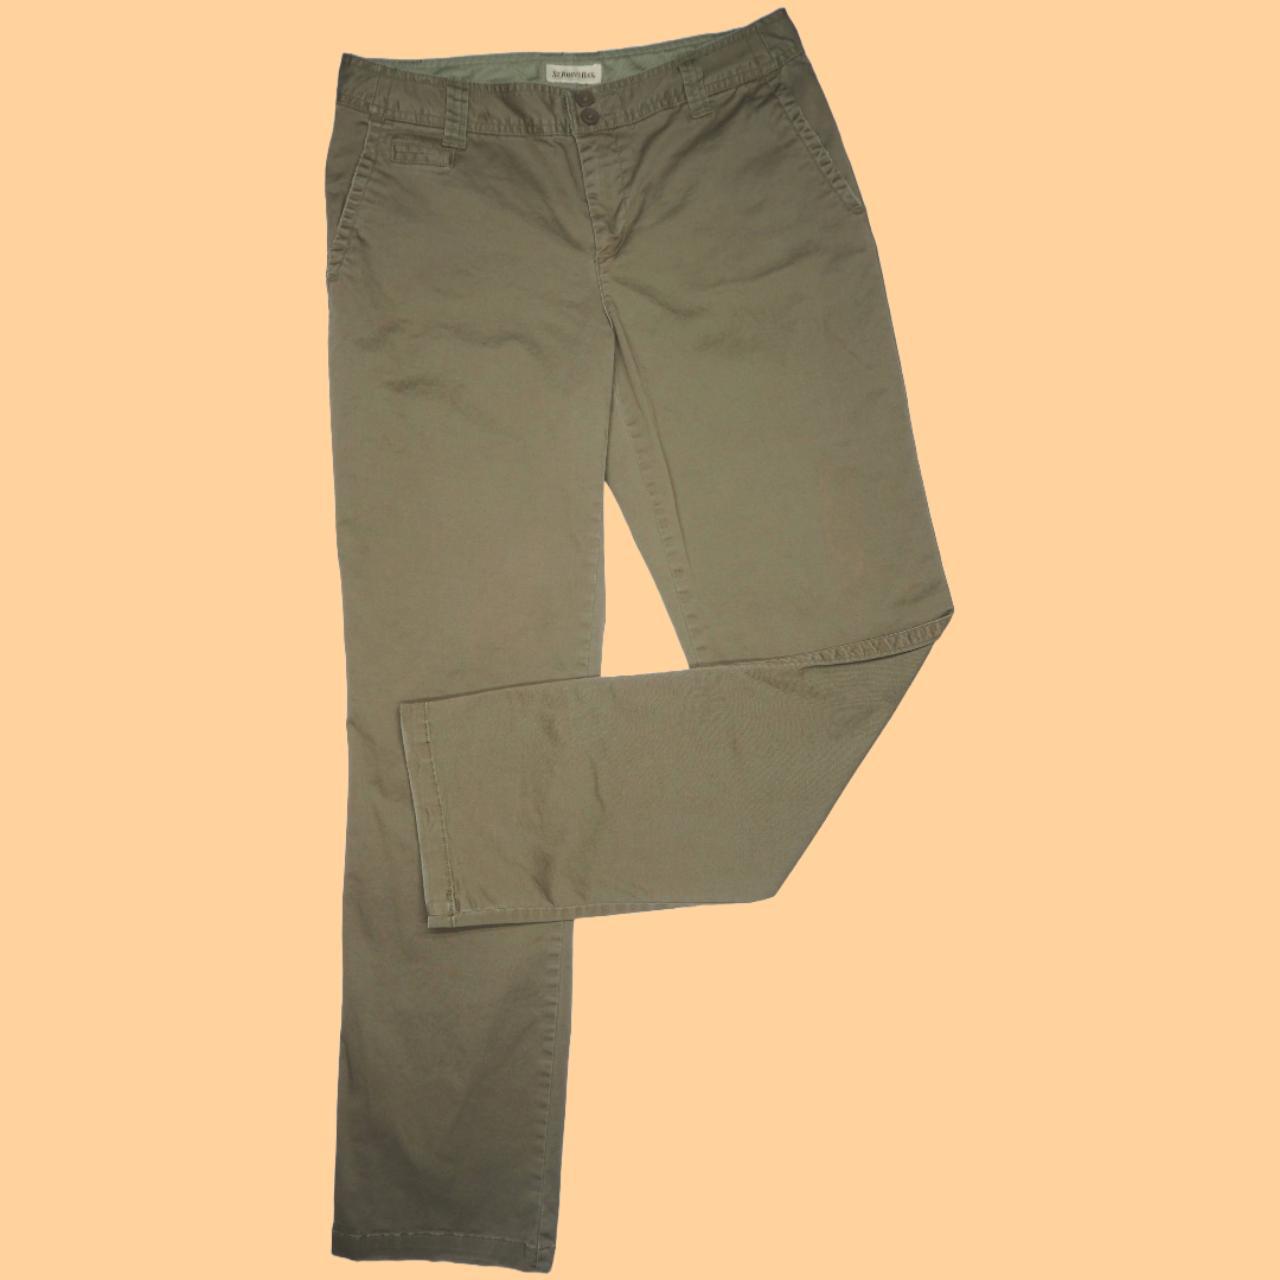 St. John's Bay pants 🐊, The cozy green color is the